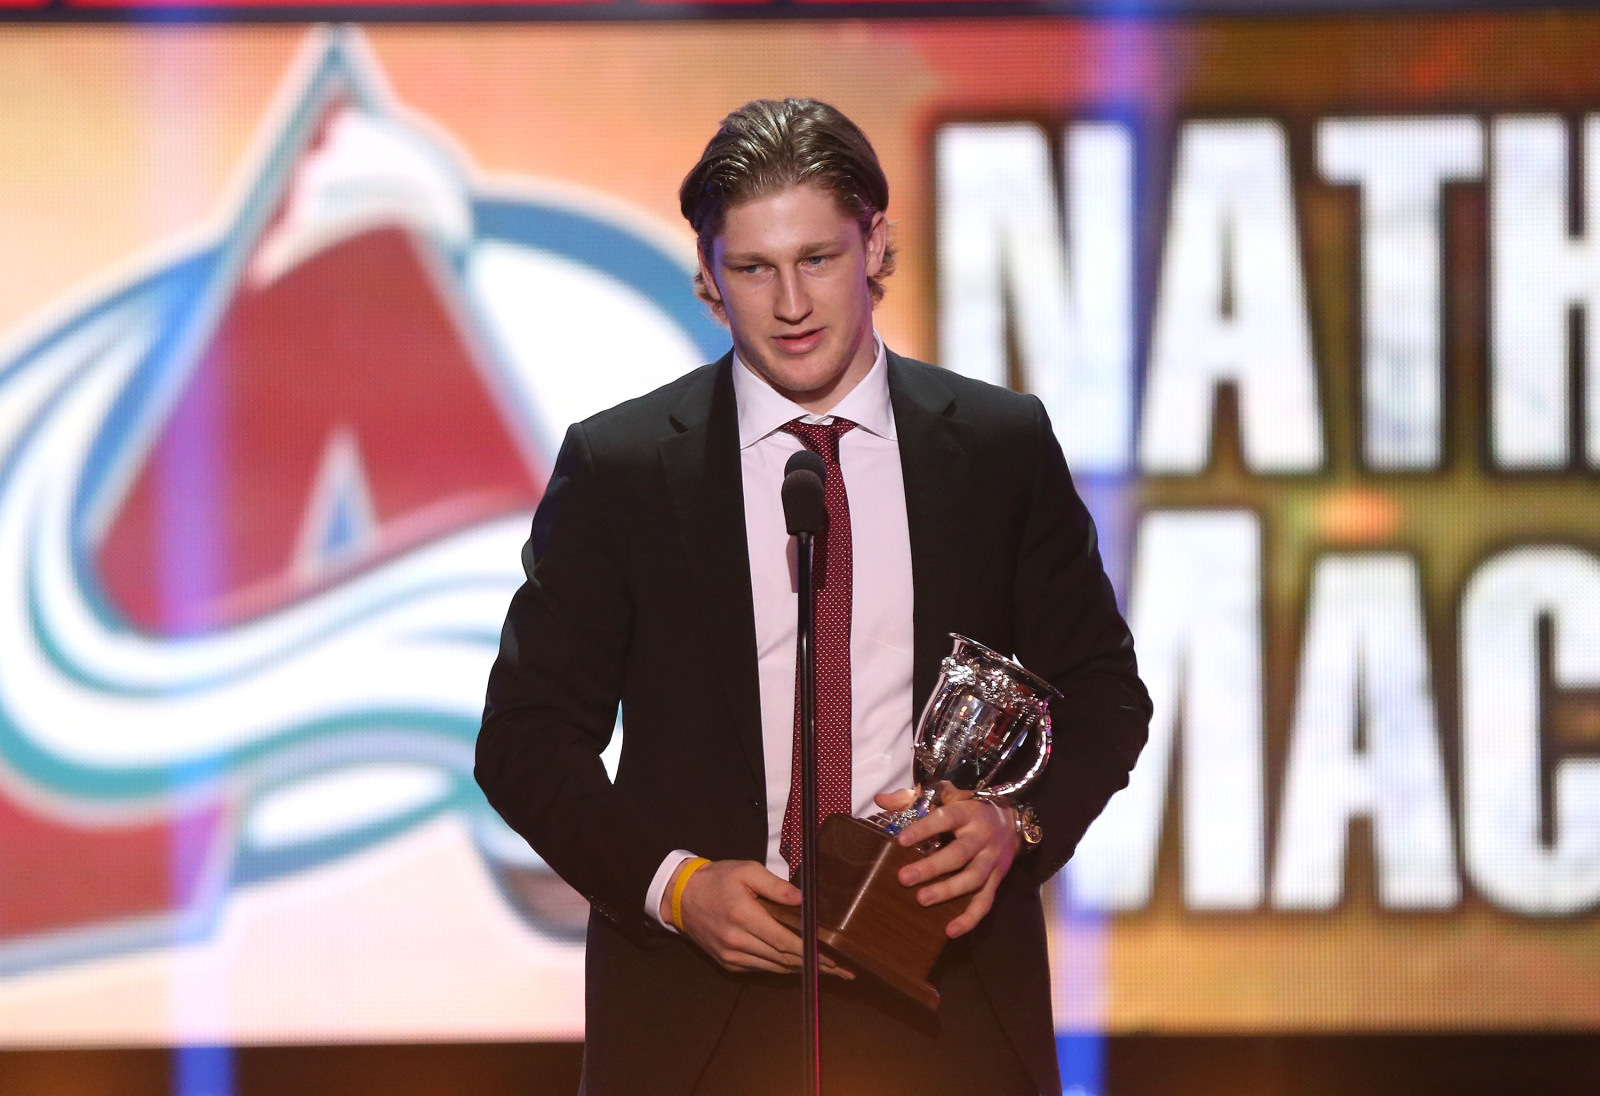 How Nathan MacKinnon became the NHL's most gifted athlete